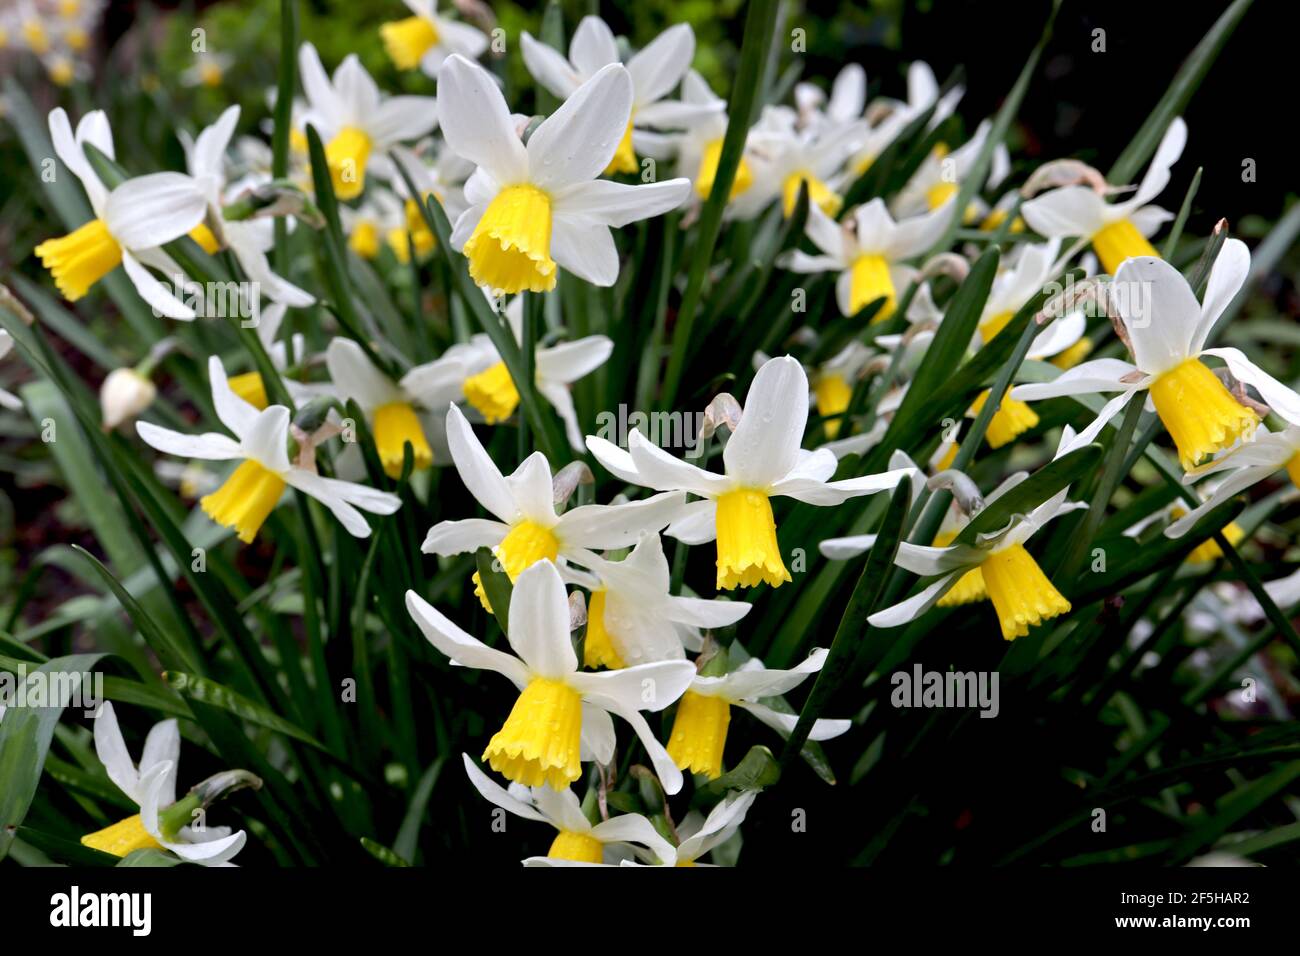 Narcissus ‘Trena’ / Daffodil Trena Division 6 Cyclamineus Daffodils Daffodils with white swept back petals and long yellow trumpets,  March, England, Stock Photo